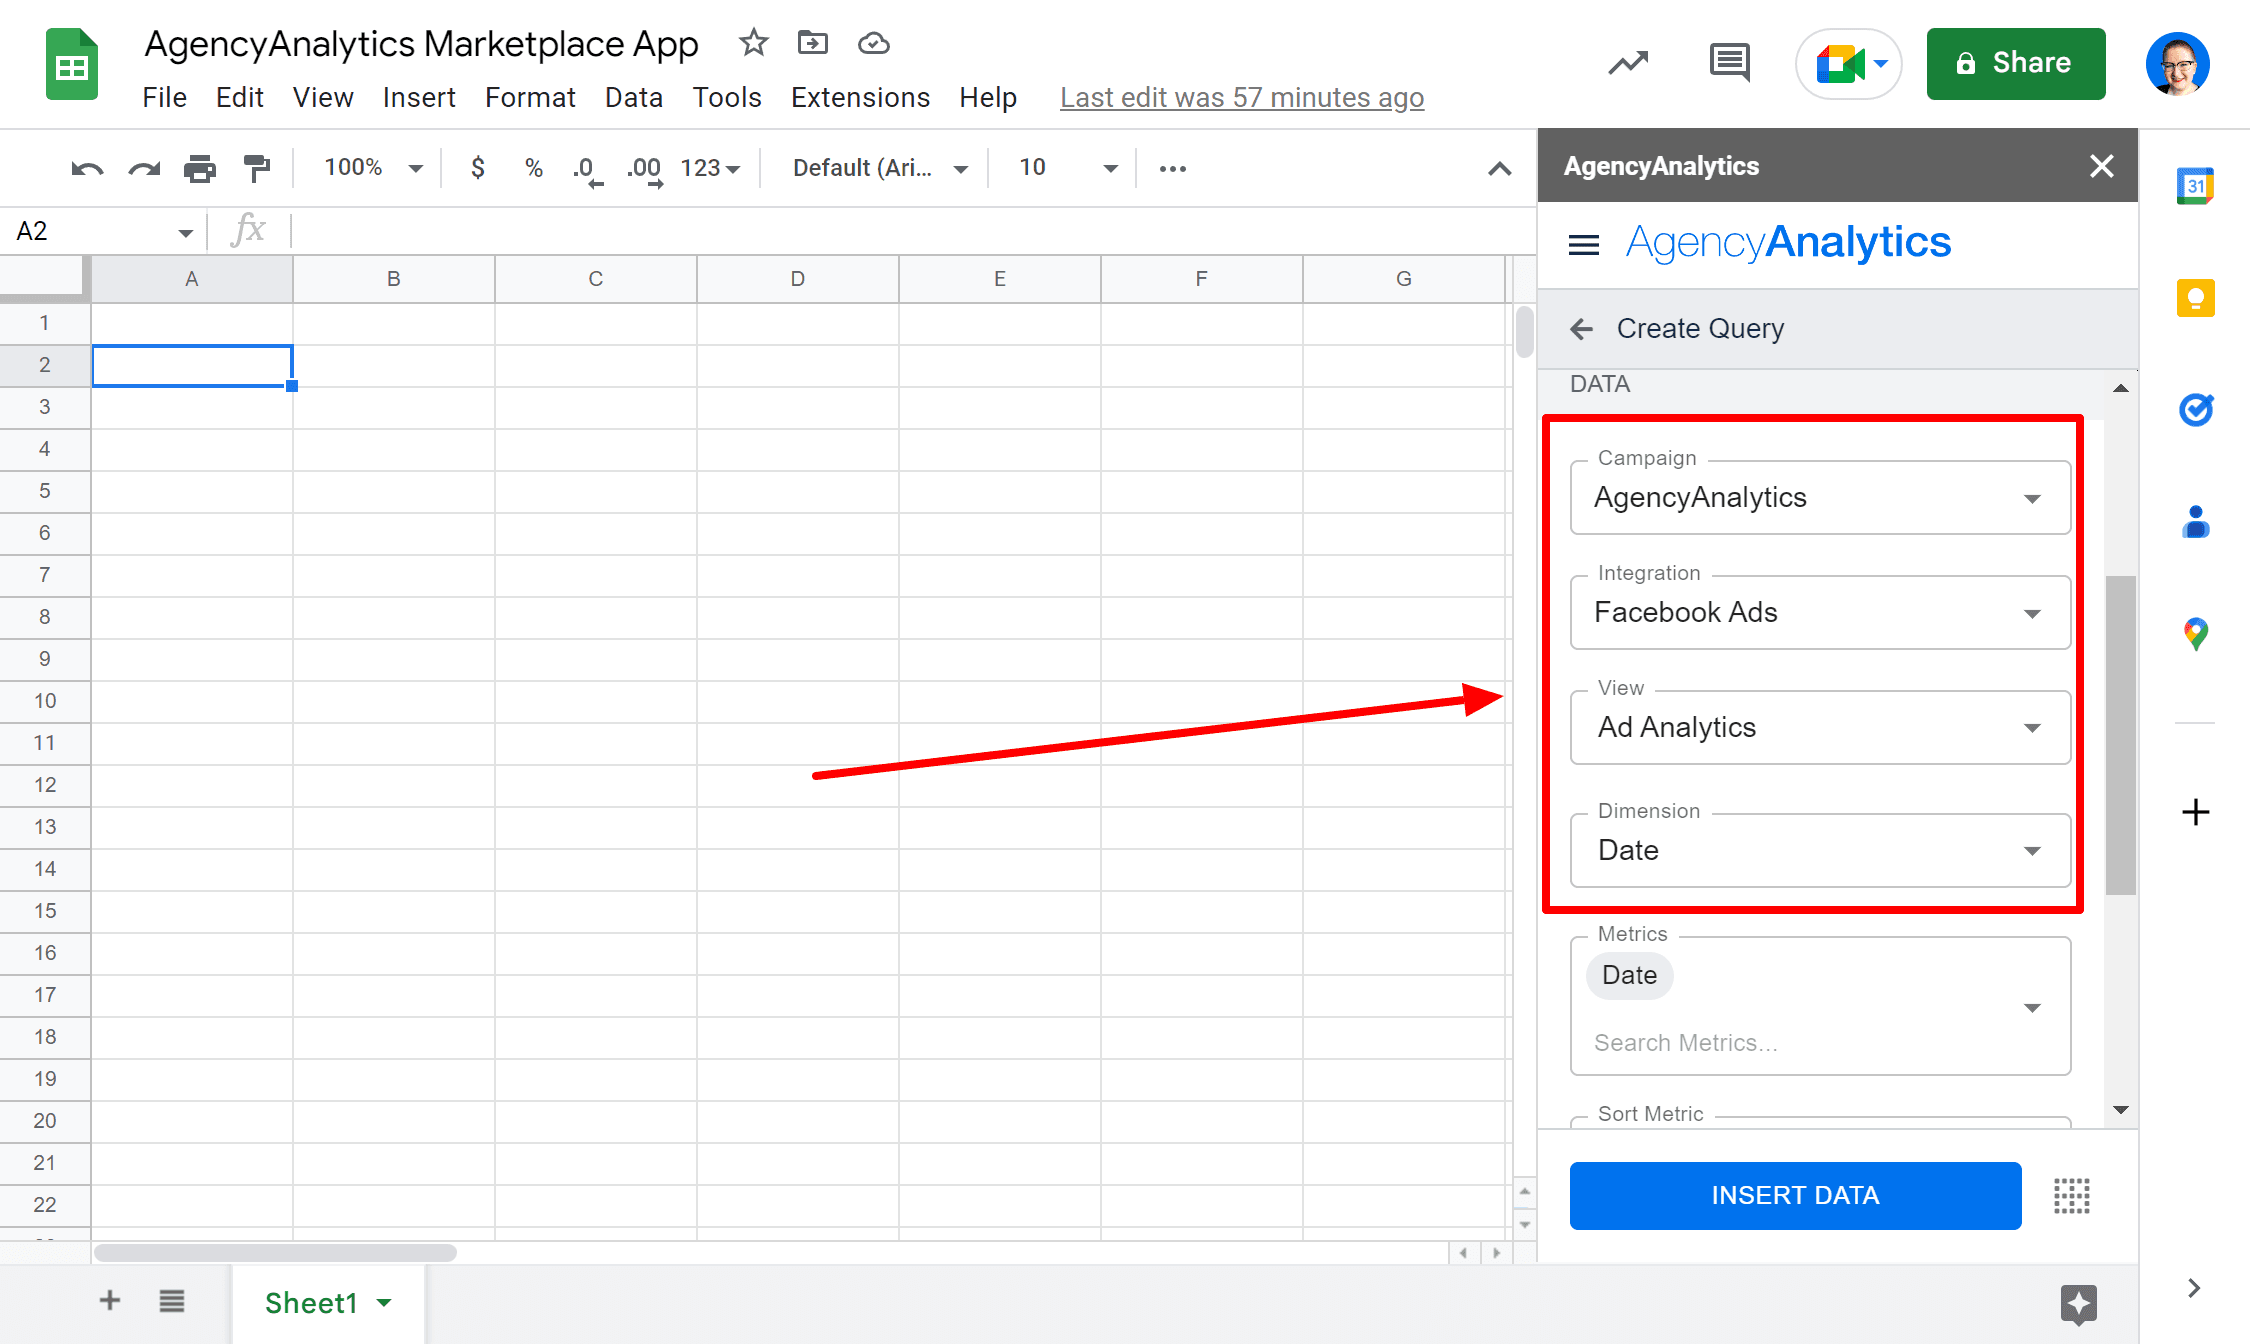 An image showing how to build query parameters in AgencyAnalytics for Google Sheets